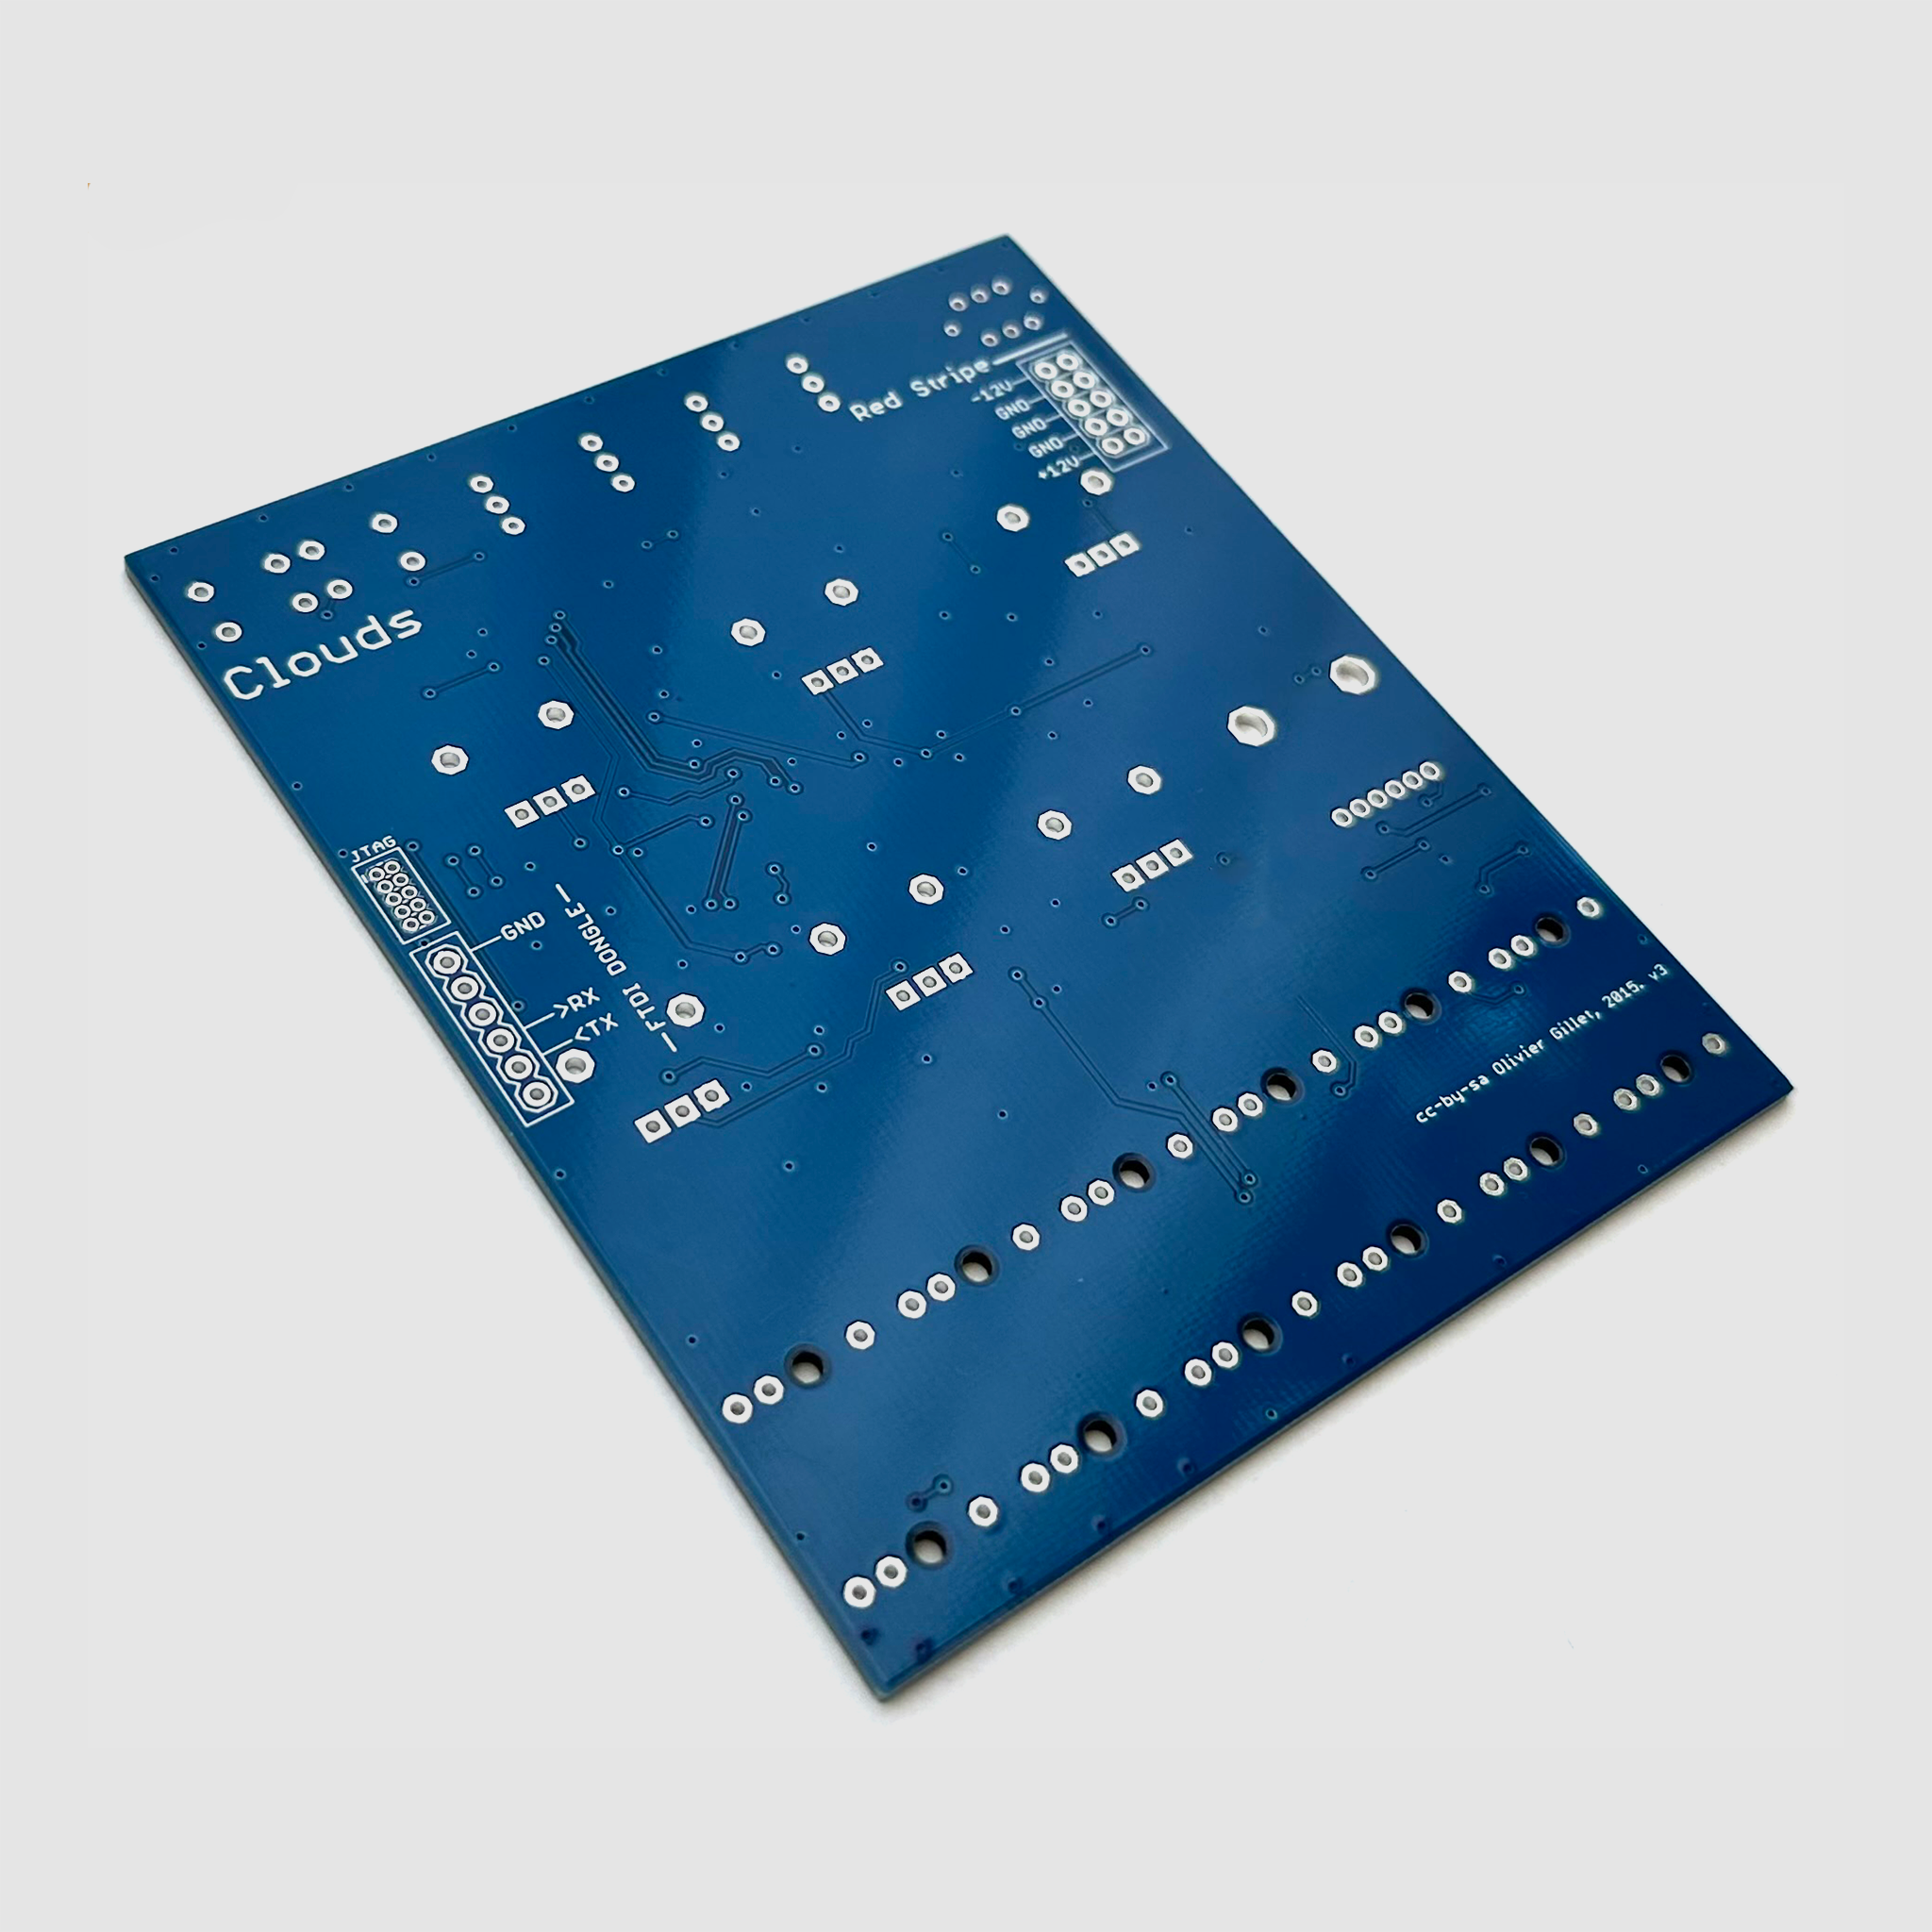 Mutable Instruments Clouds PCB